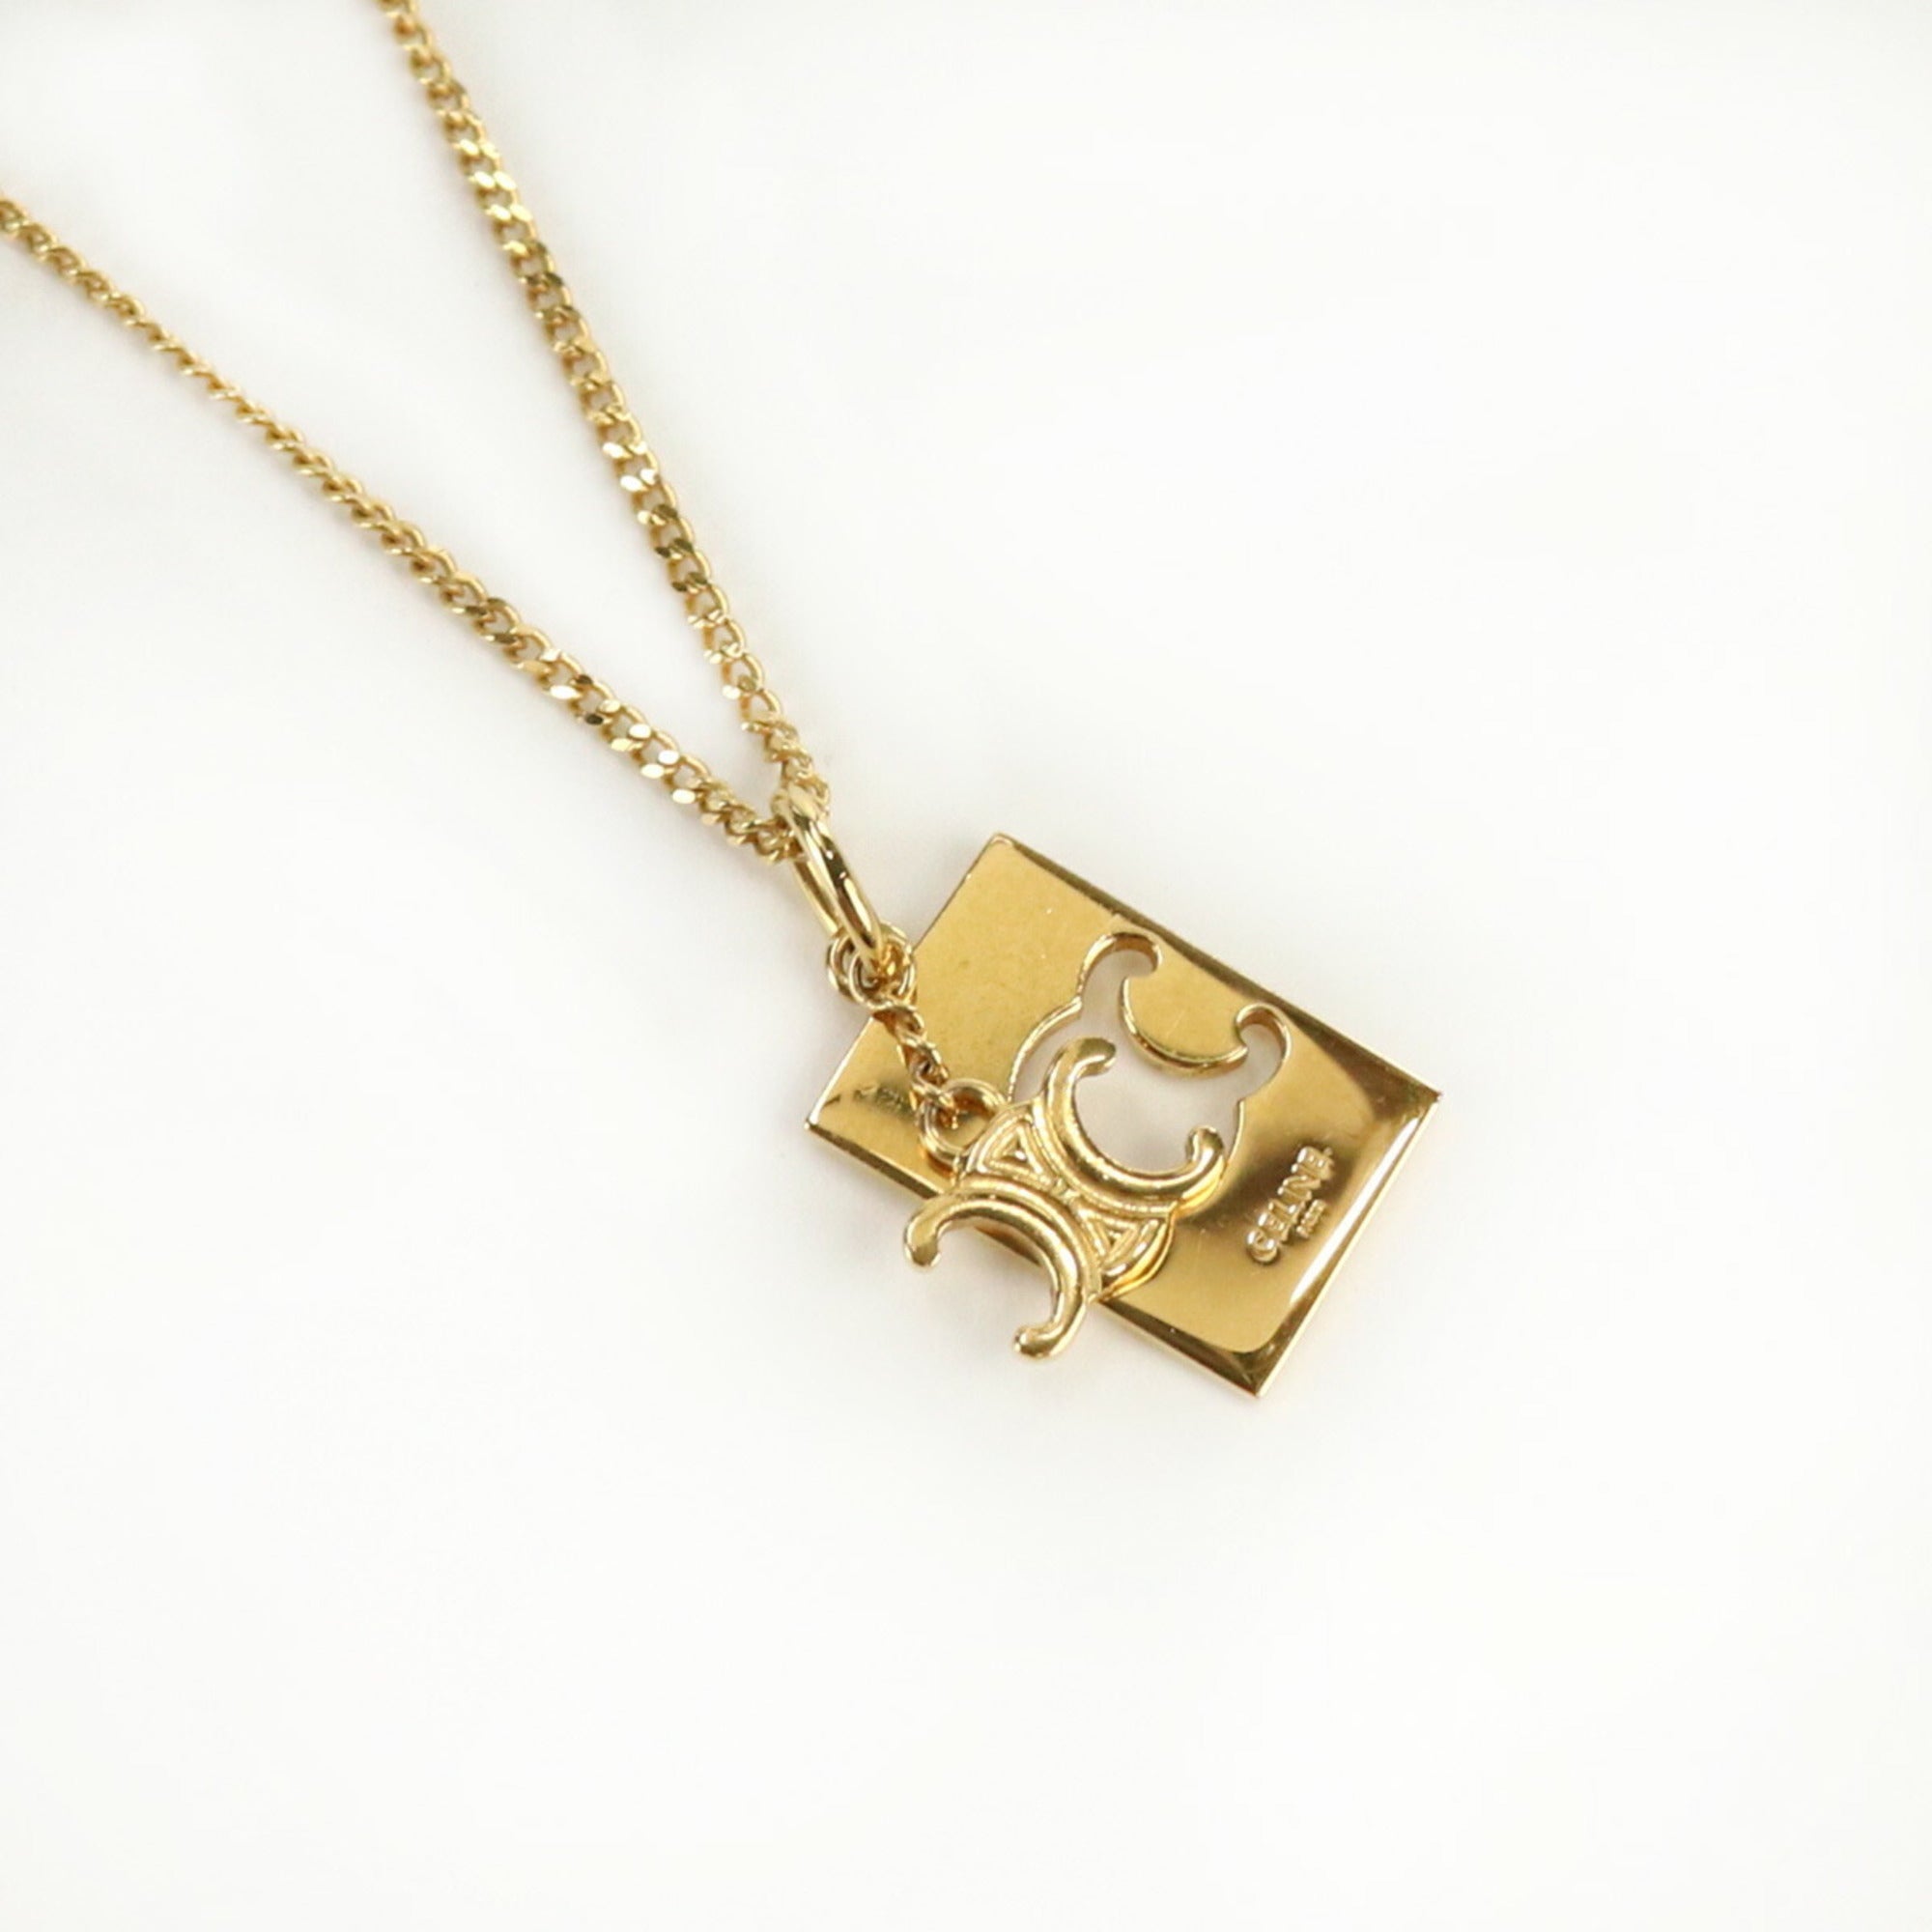 Shop CELINE Triomphe Triomphe Mini Triomphe Necklace in Brass with Gold  Finish (460MS6BRA.35OR) by nanalyme | BUYMA